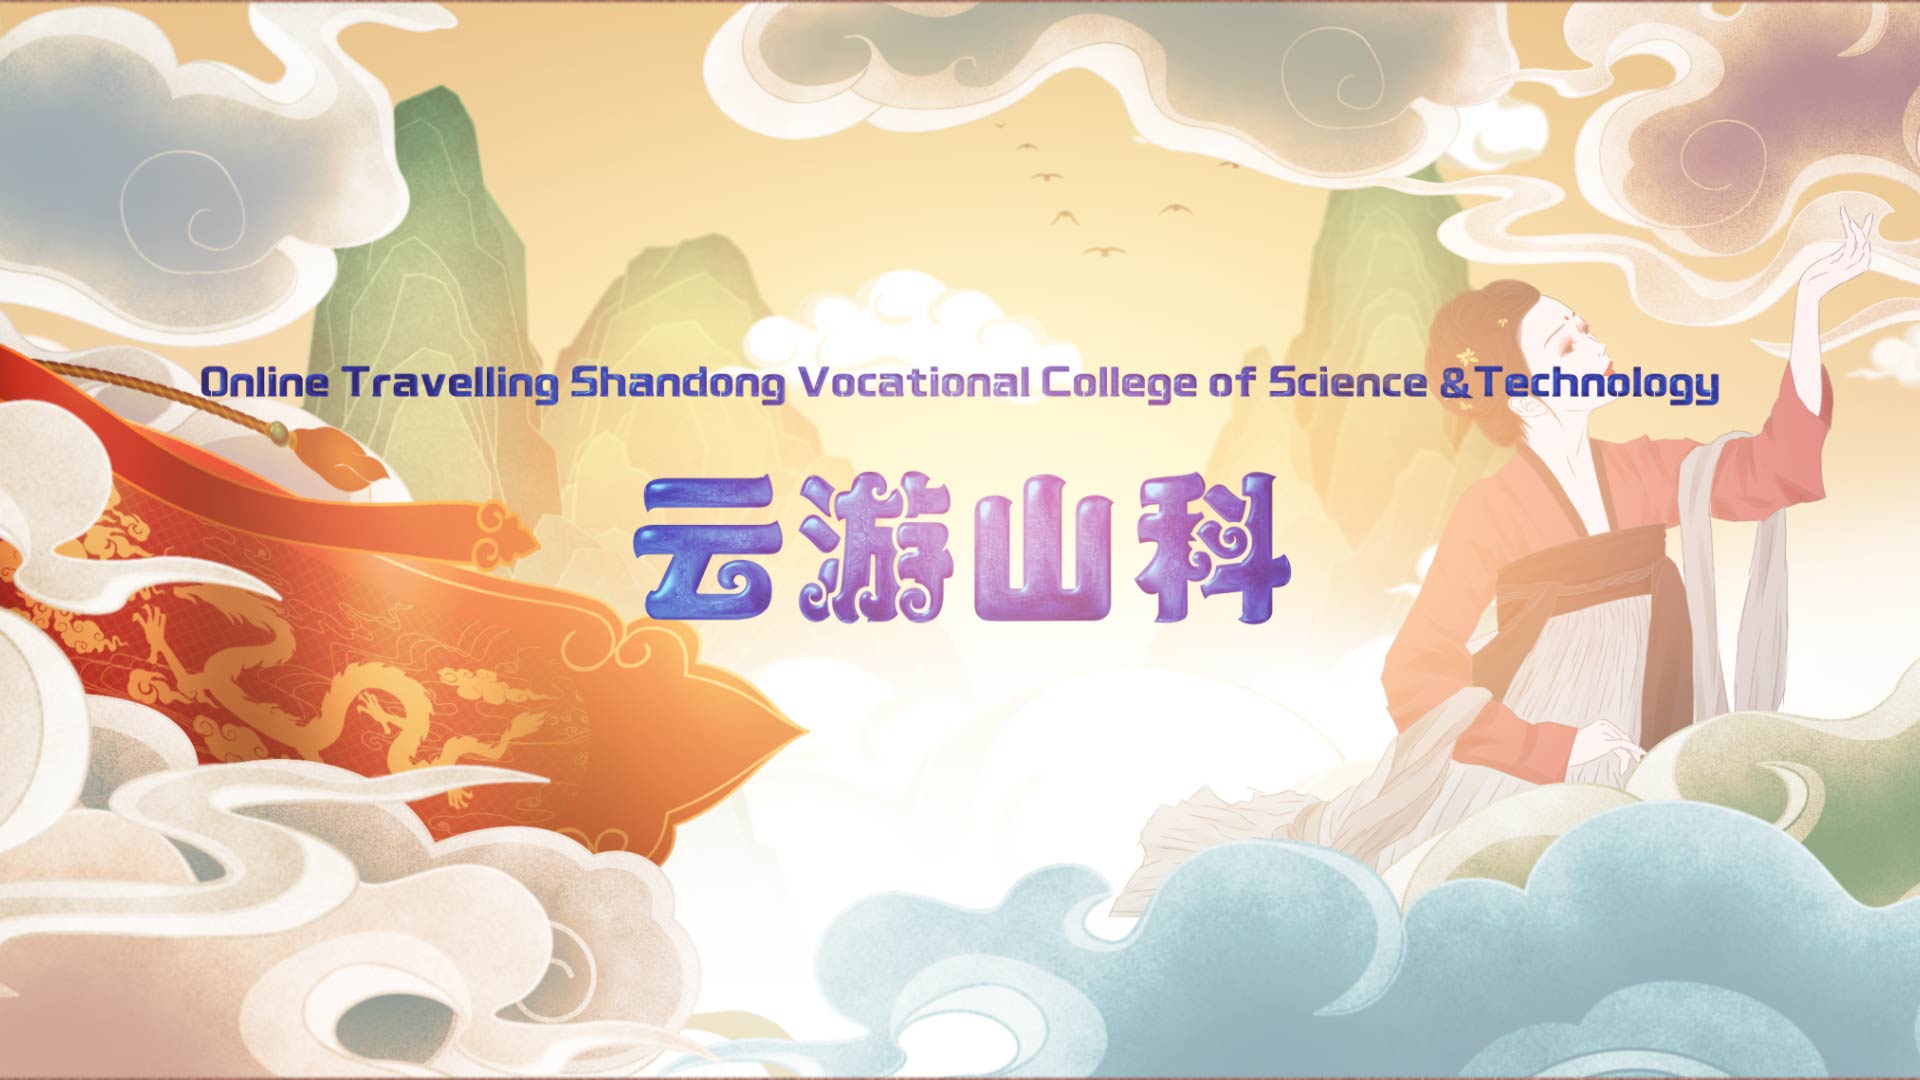 Online Travelling Shandong Vocational College of Science &Technology